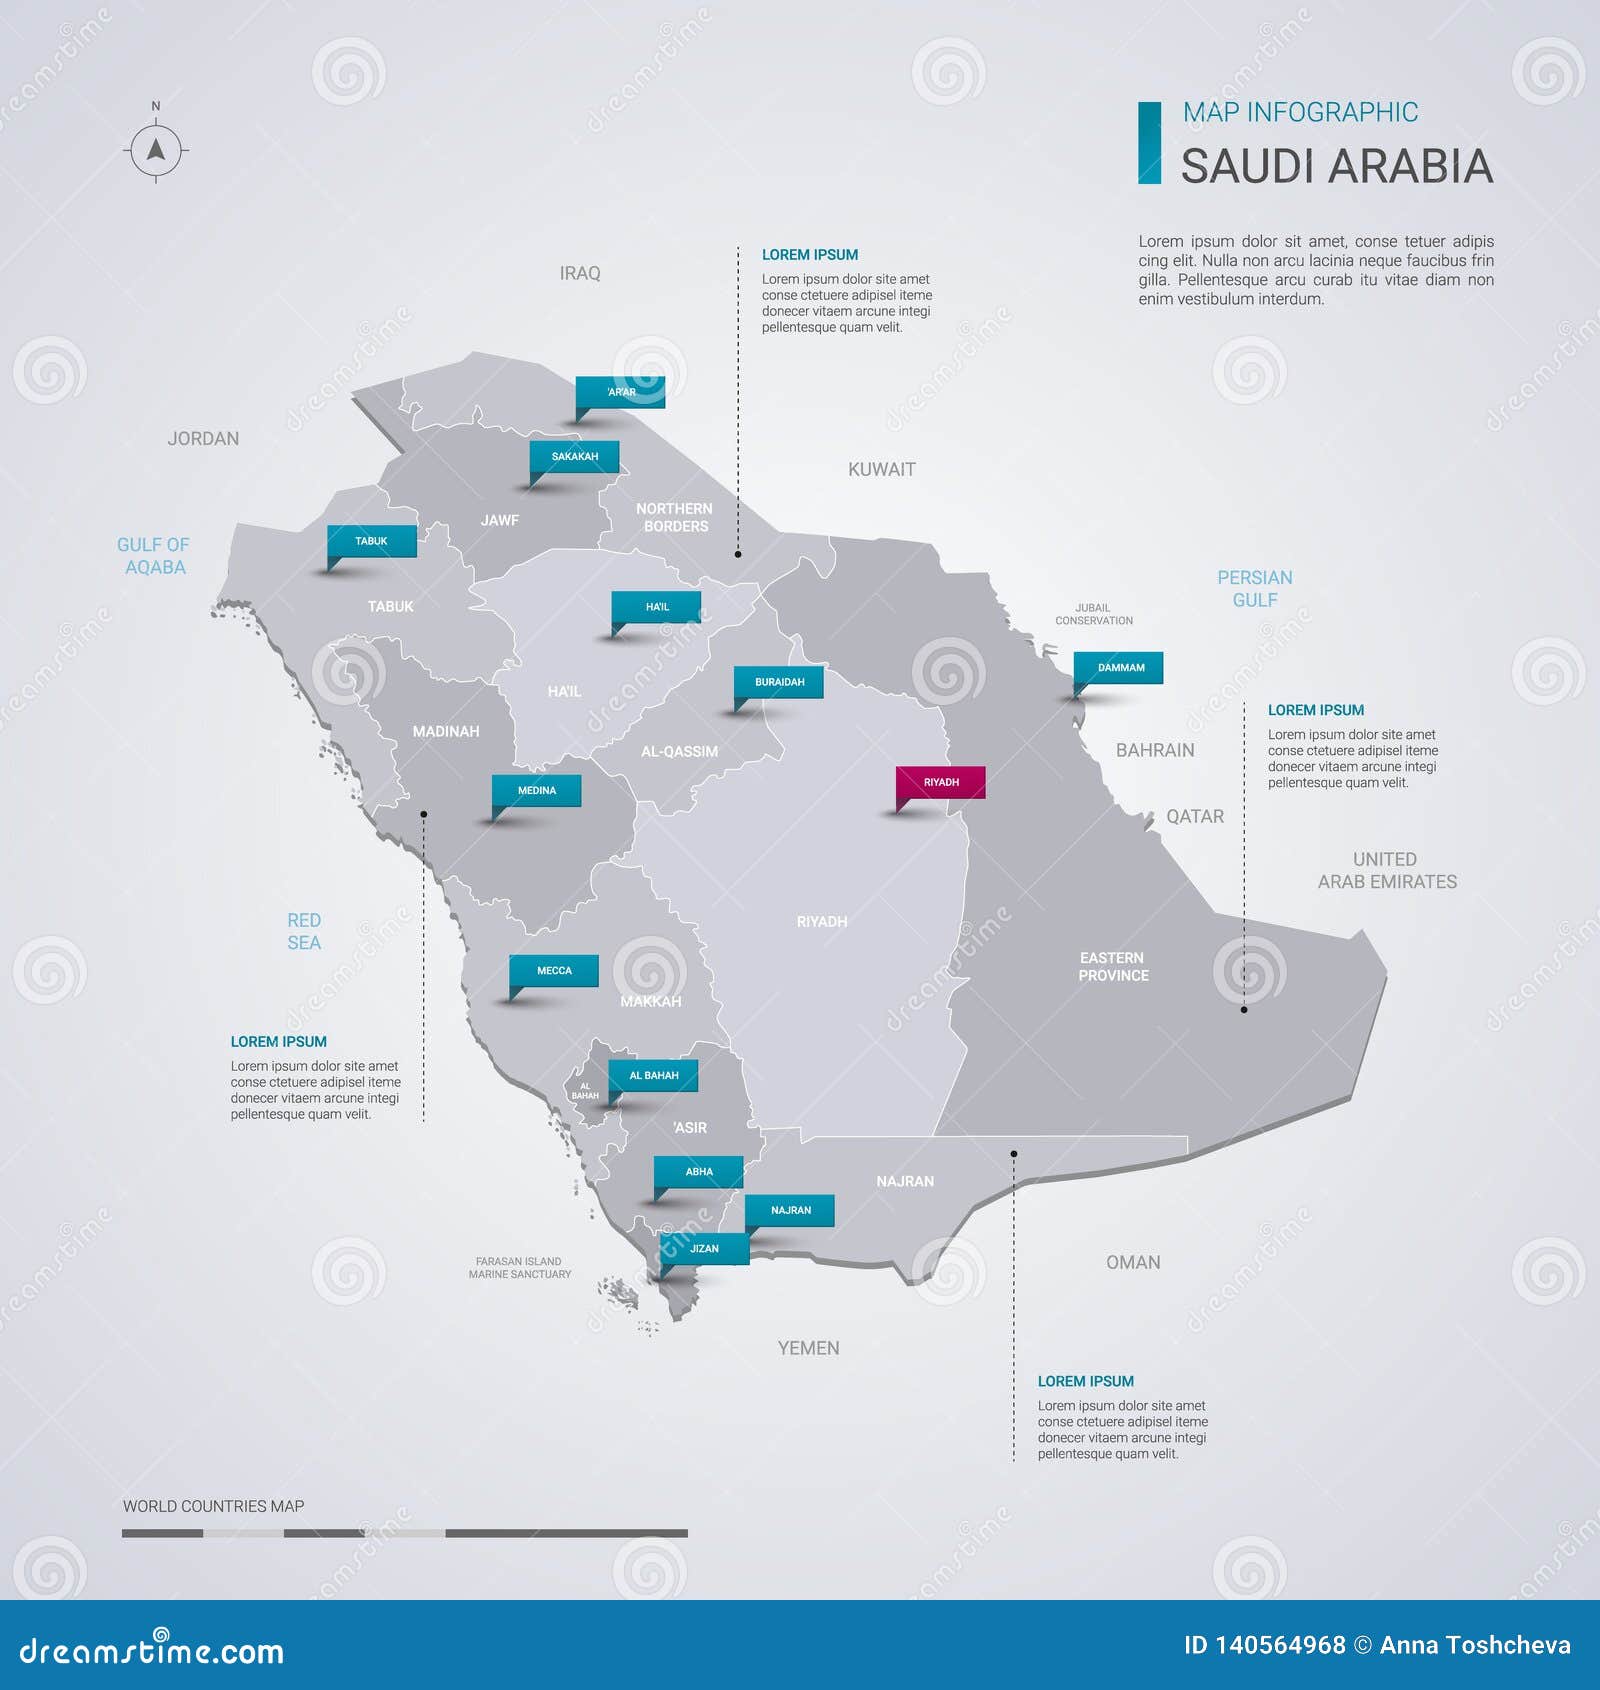 saudi arabia  map with infographic s, pointer marks